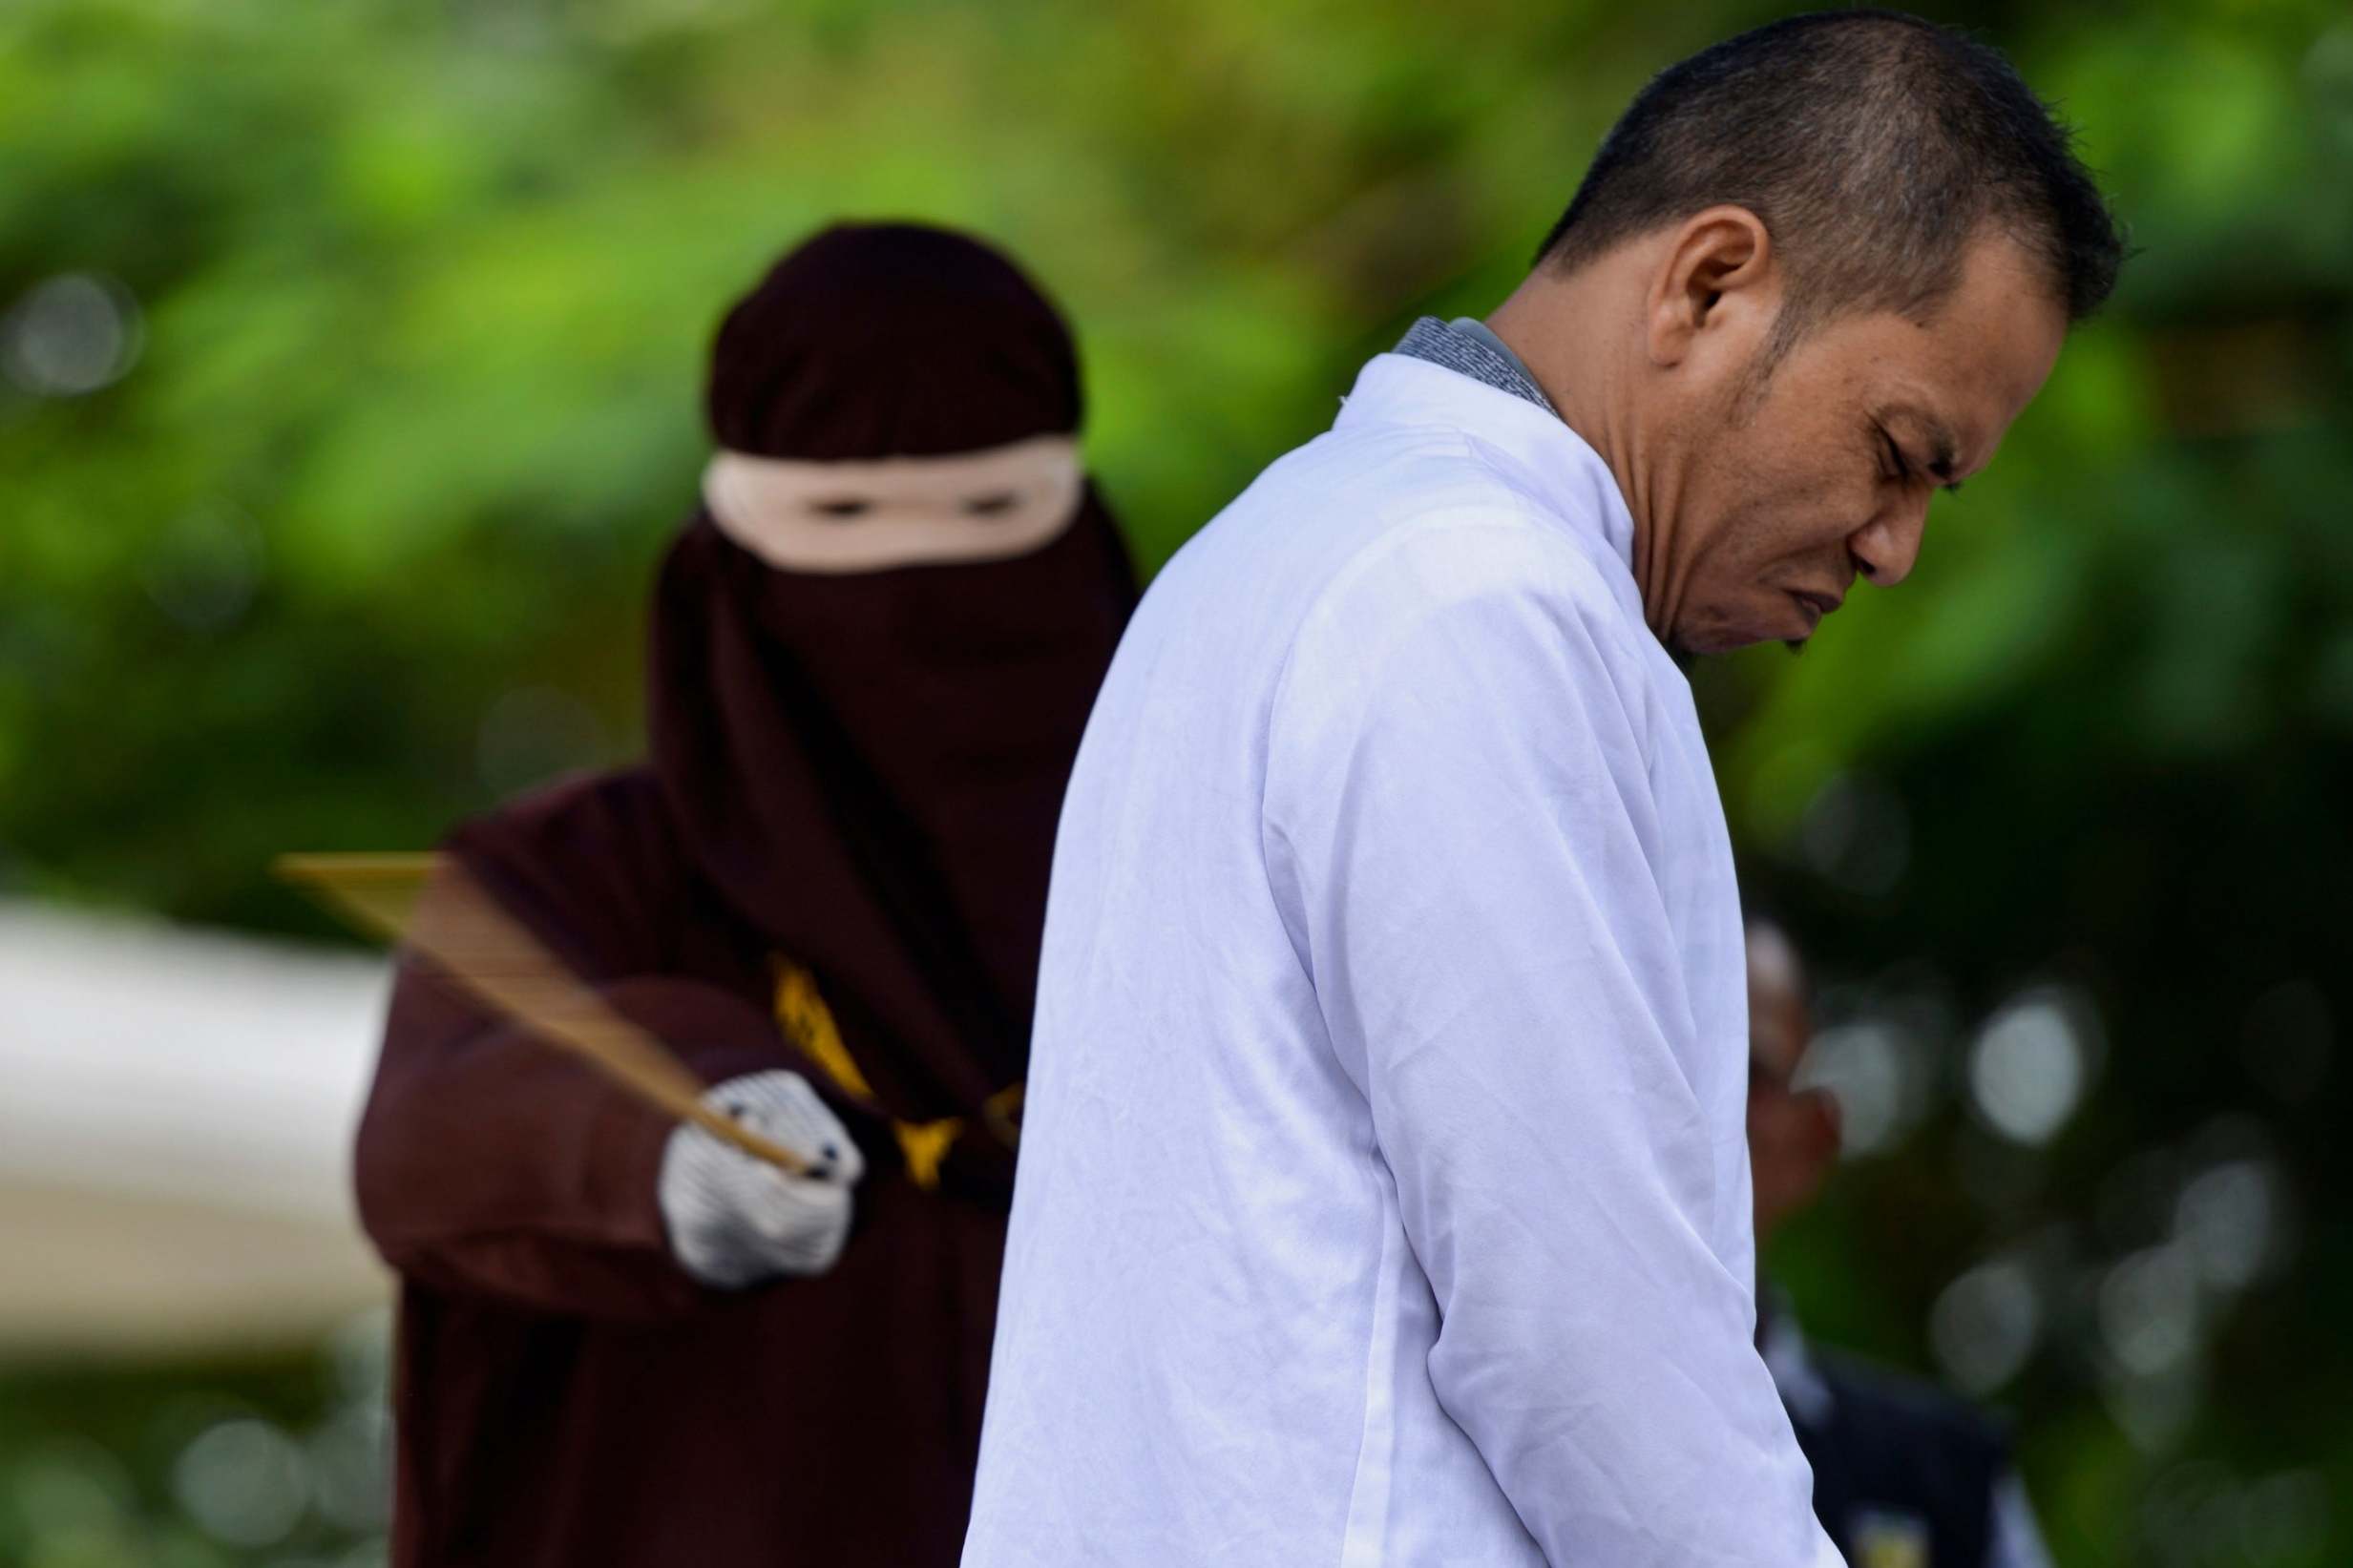 Aceh was given special status to introduce its own Islamic laws in 2005